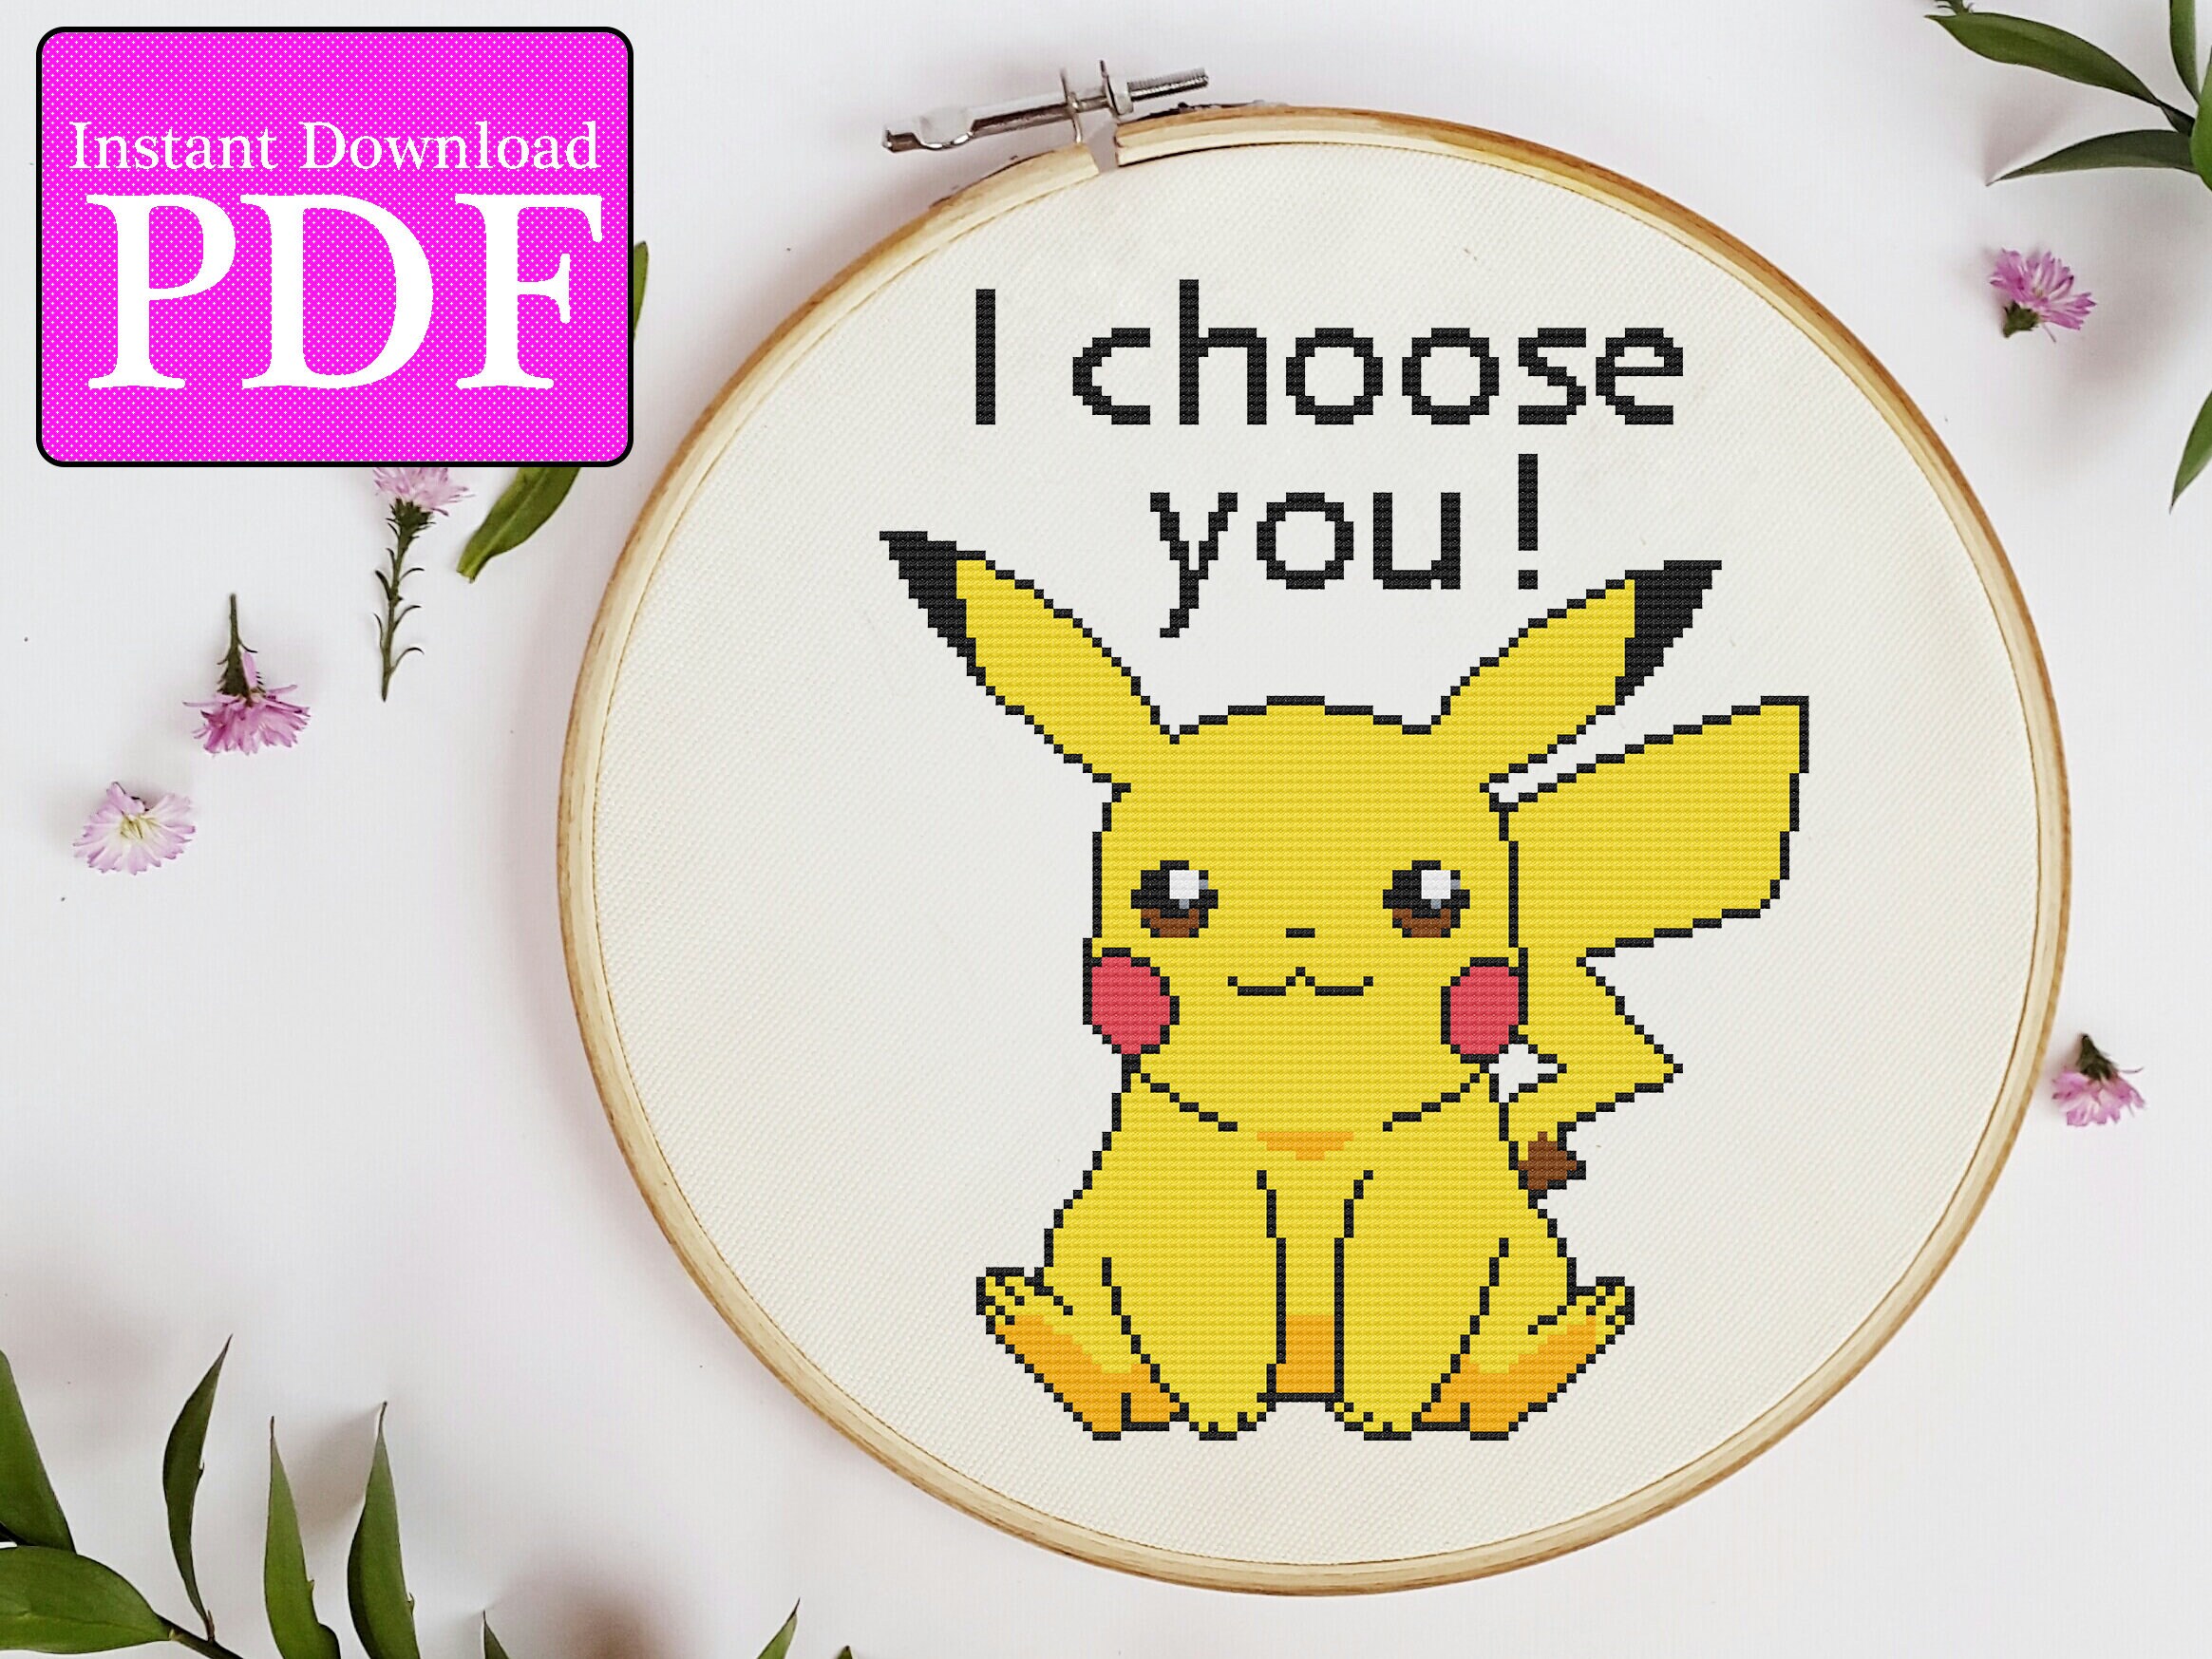 I'm sorta new at this but I did a pikachu cross stitch based on a